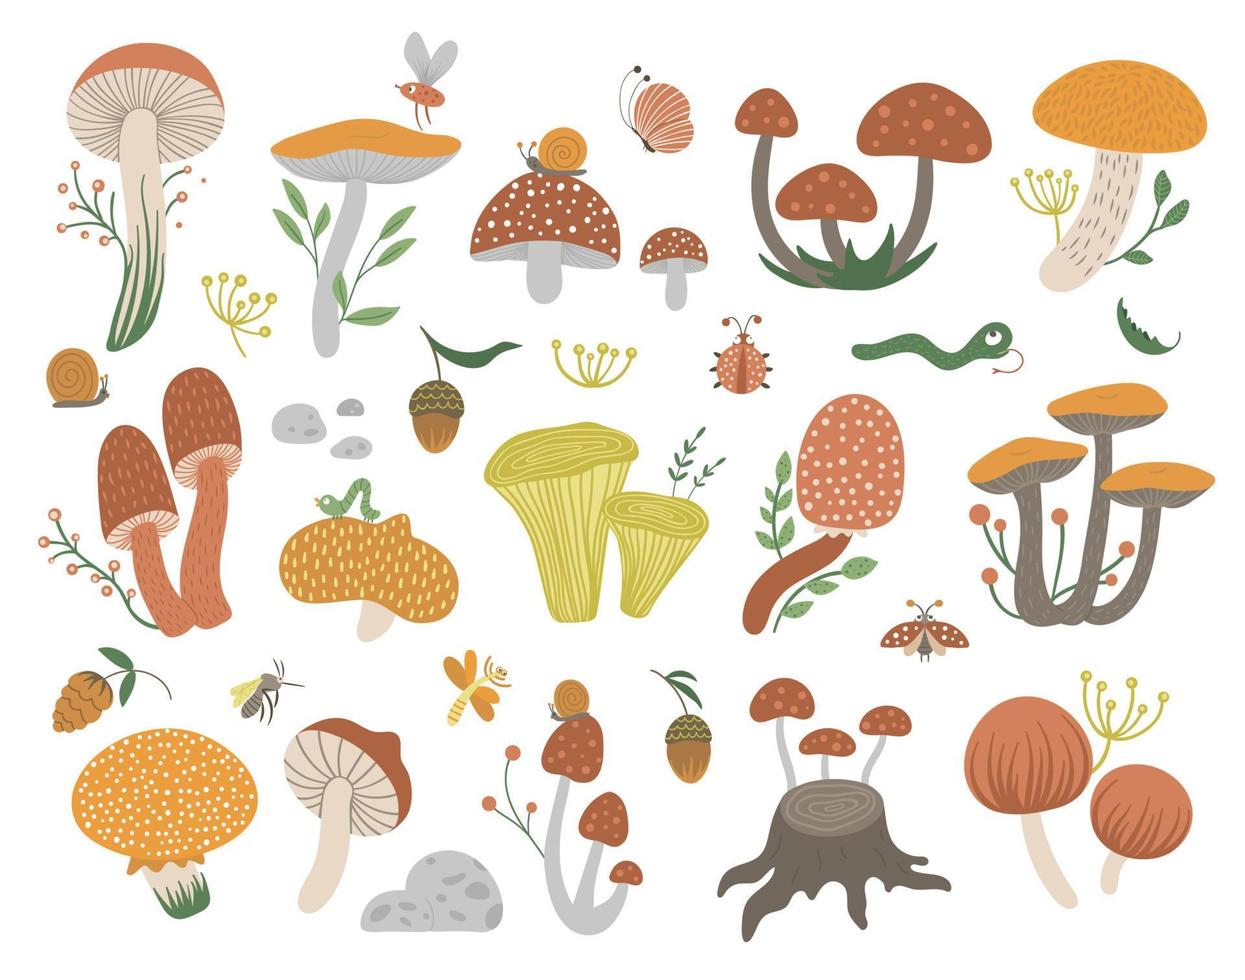 Vector set of flat funny mushrooms with berries, leaves and insects. Autumn clip art for children design. Cute fungi illustration with acorns and cones